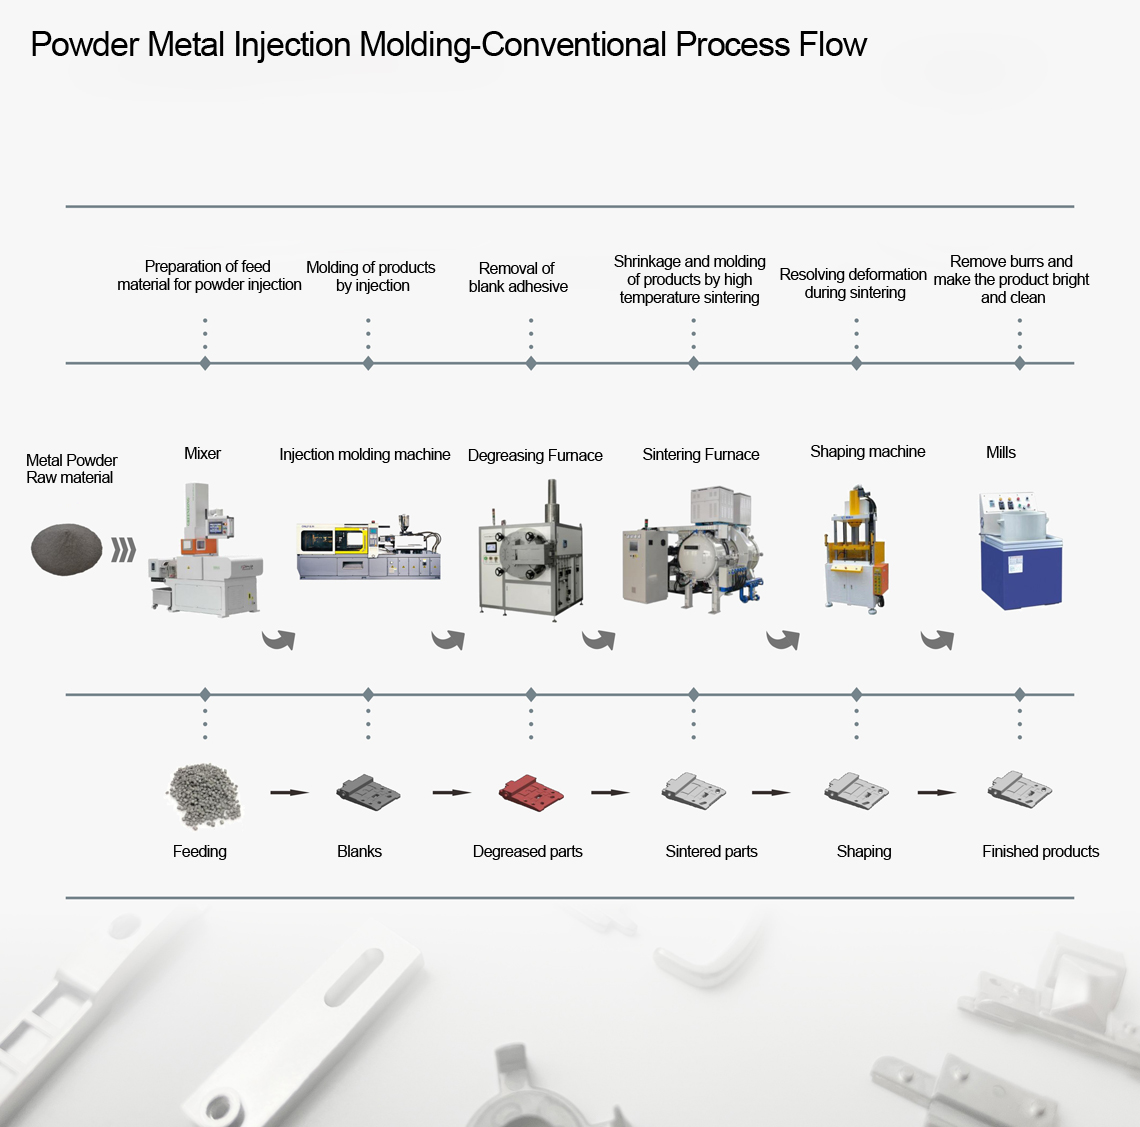 Powder Injection Molding-Conventional Process Flow